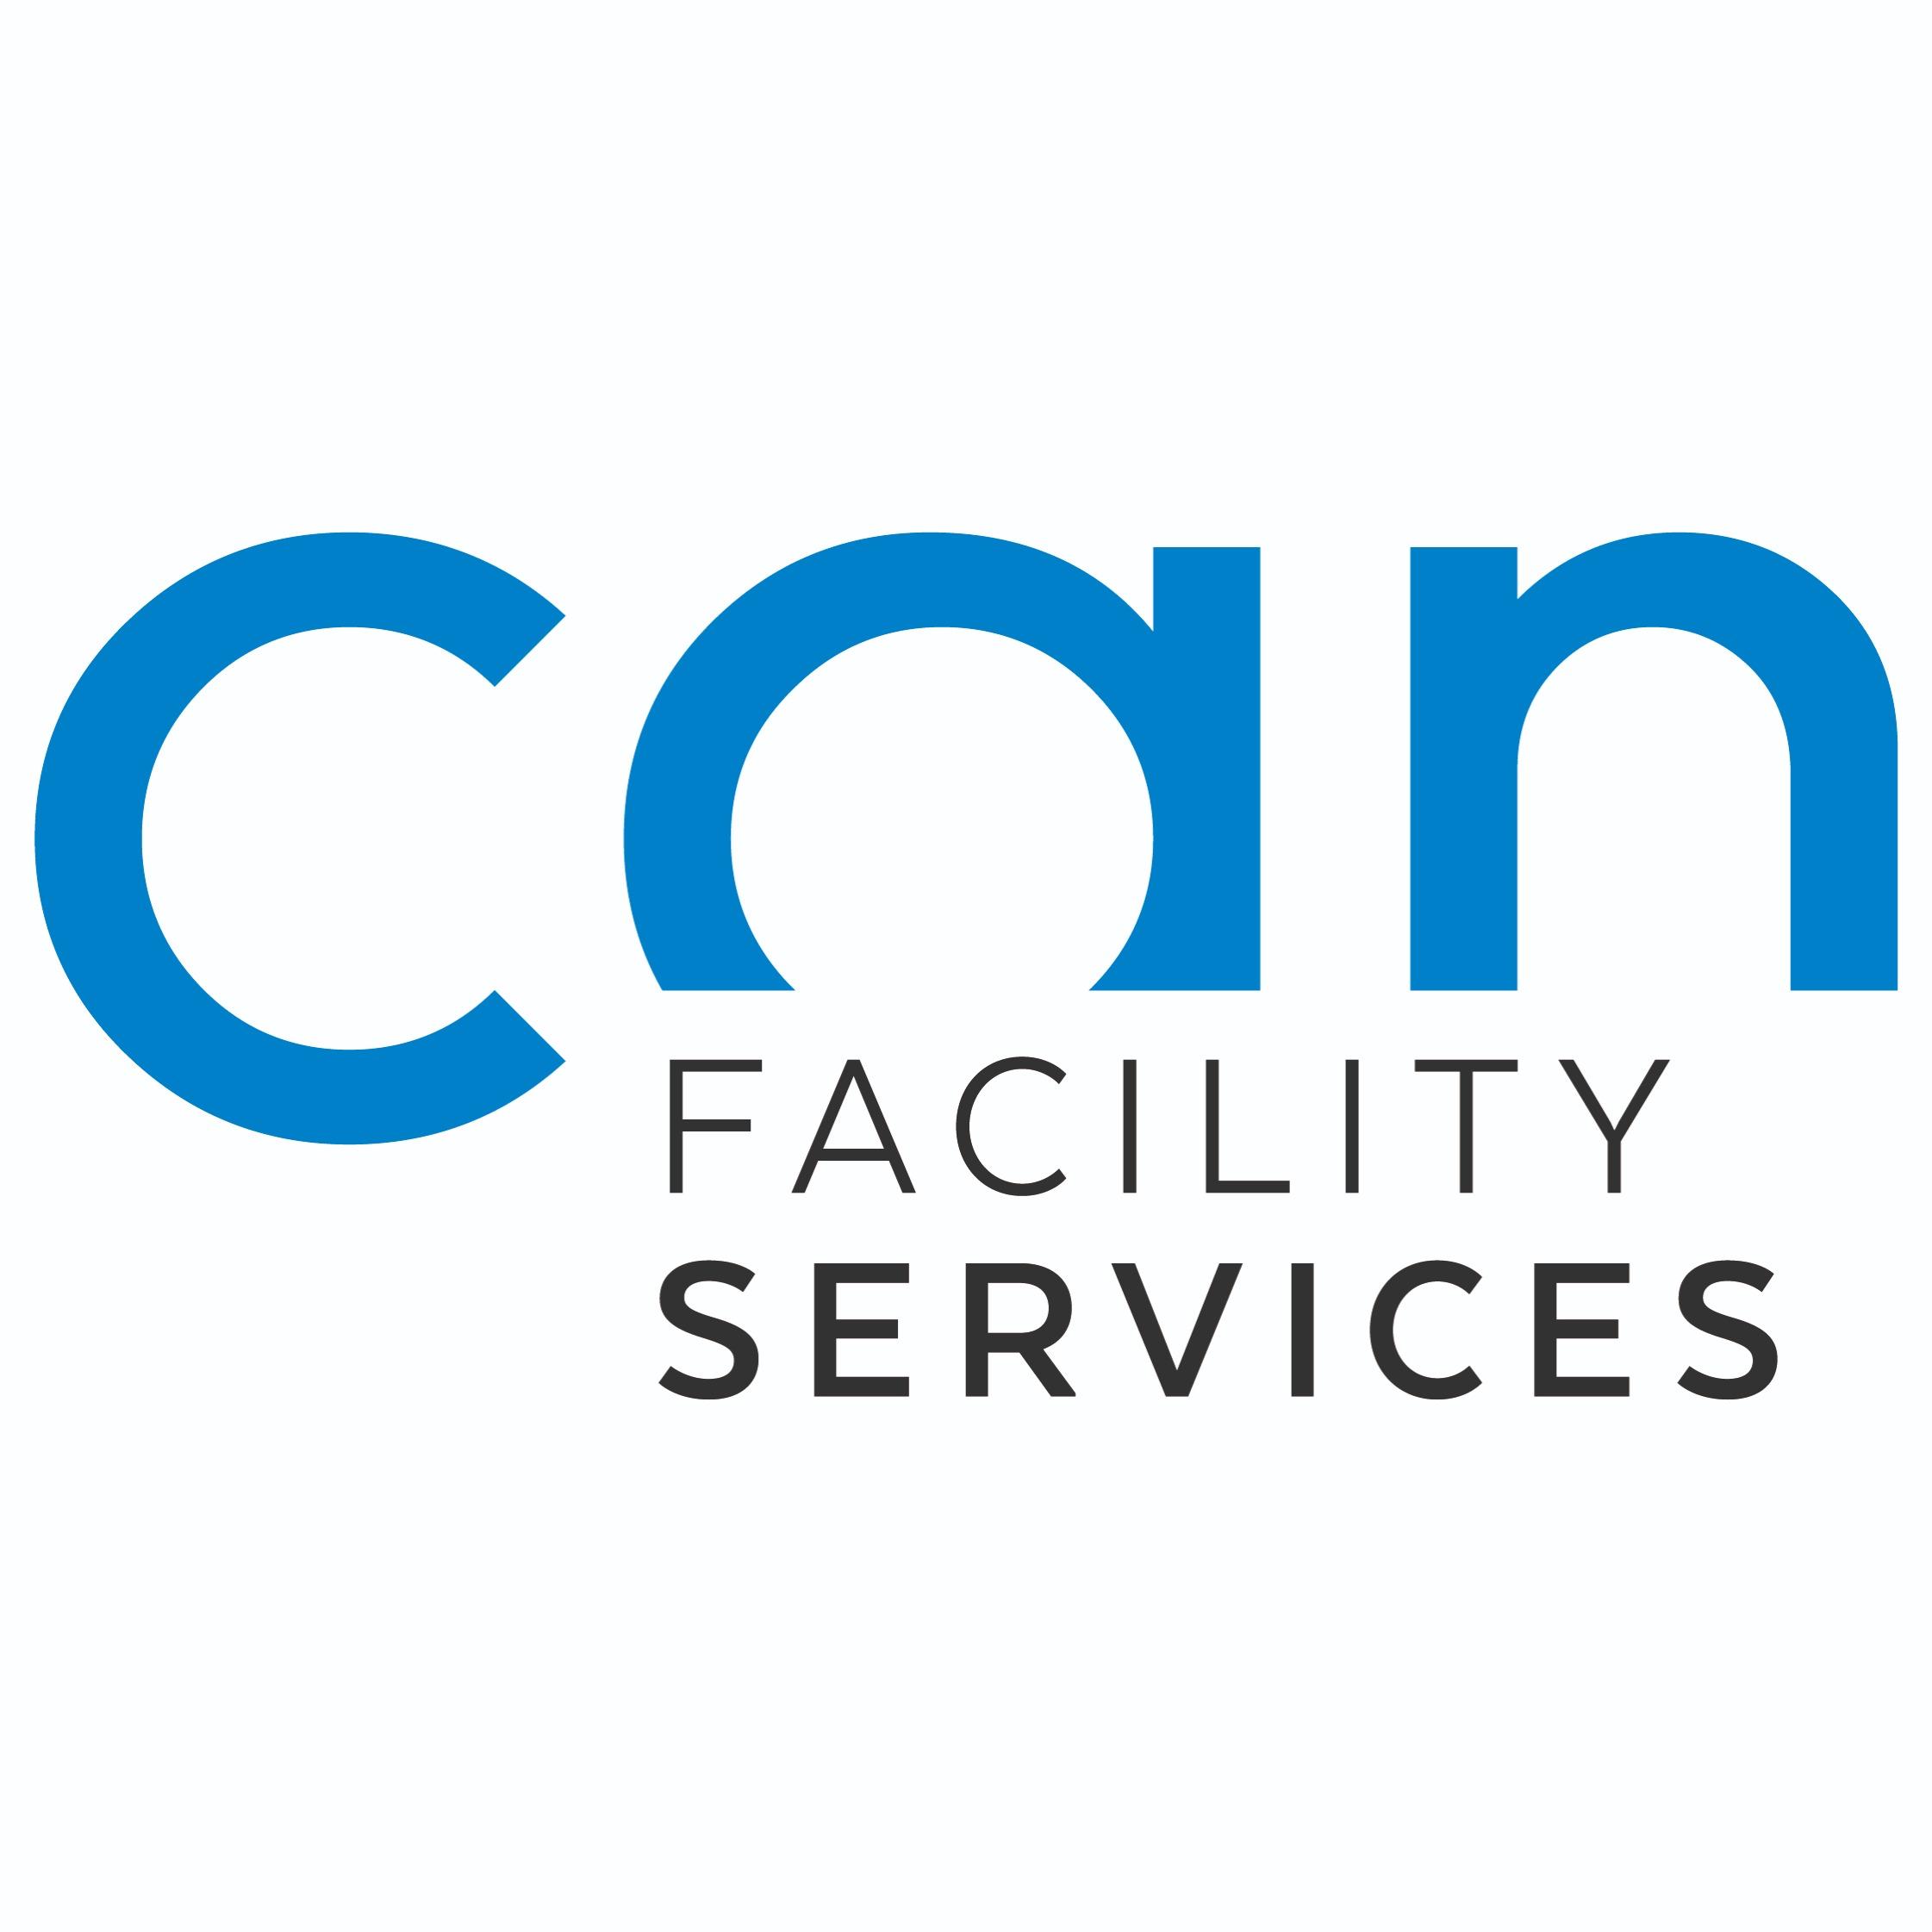 Gebäudereinigung Wuppertal I Can Facility Services GmbH & Co. KG in Wuppertal - Logo